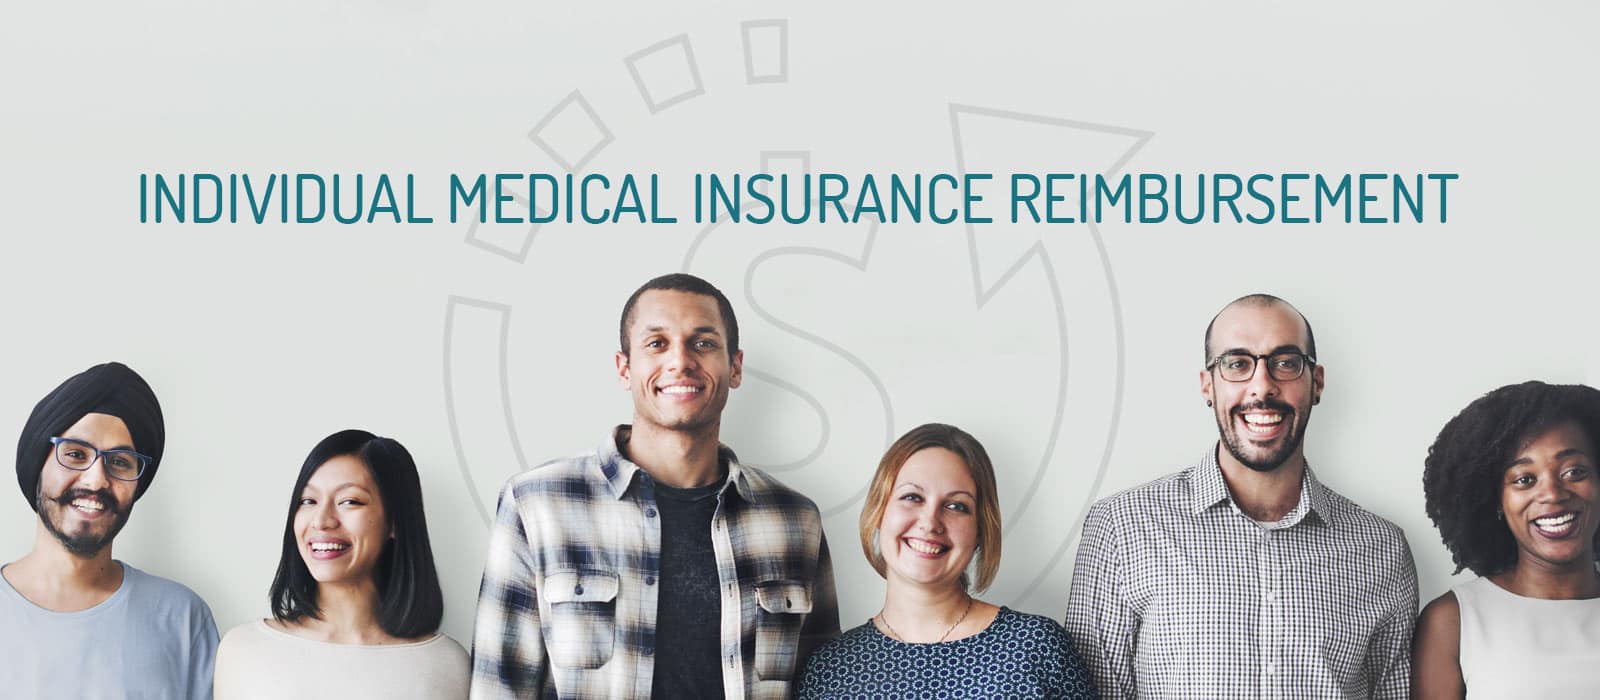 Medical insurance reimbursement text over an image of a group of smiling people on PSA Financial's website